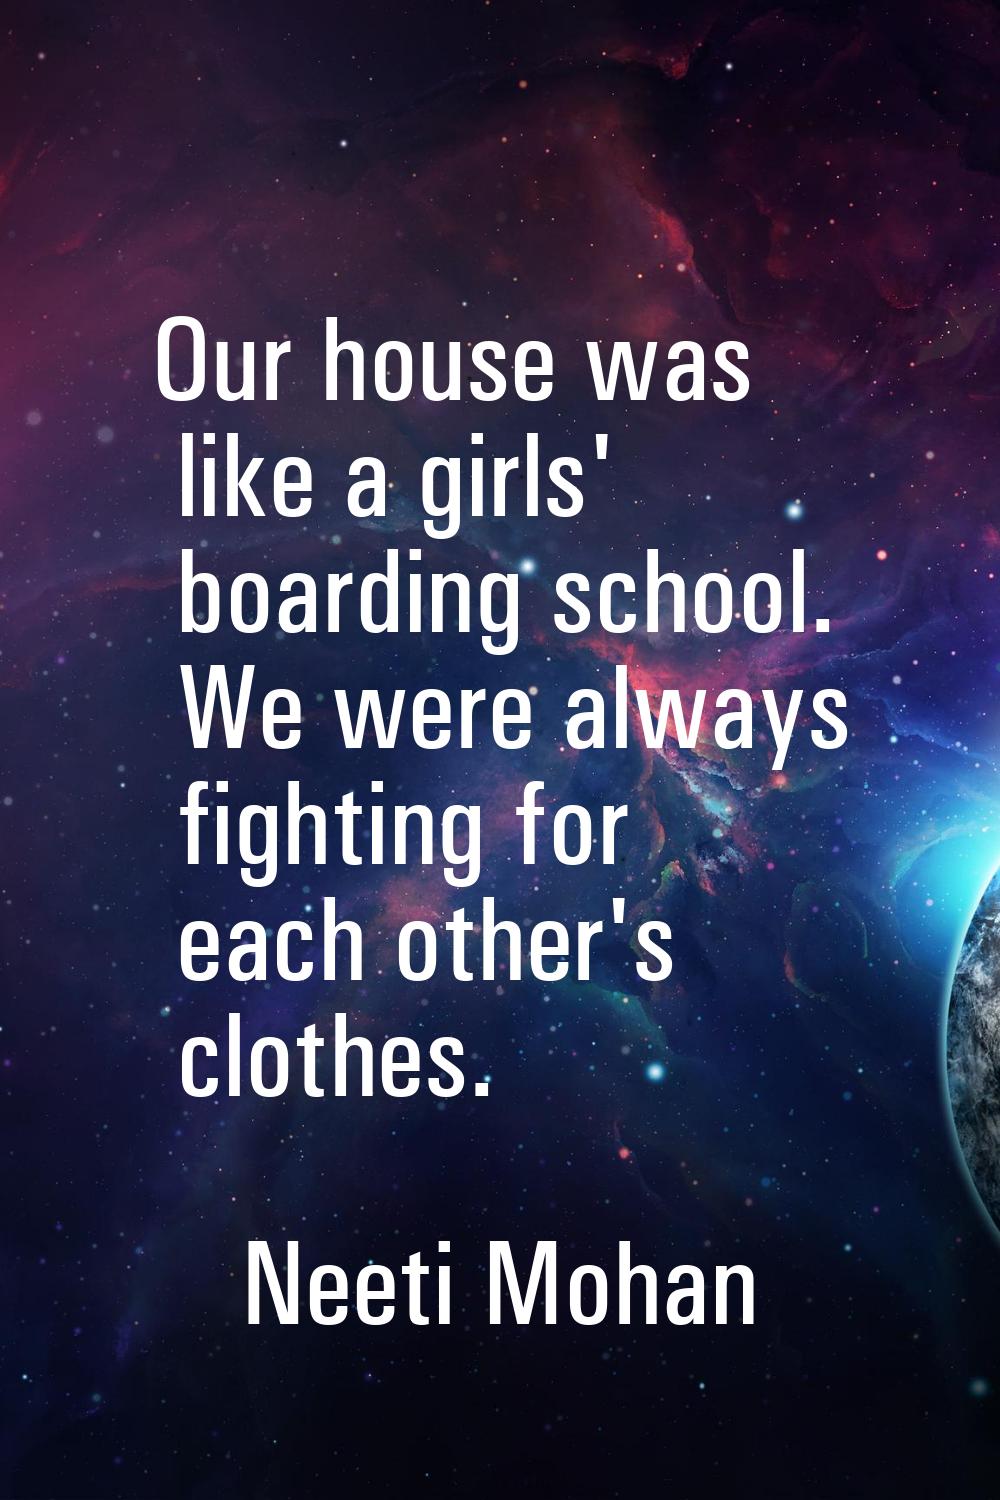 Our house was like a girls' boarding school. We were always fighting for each other's clothes.